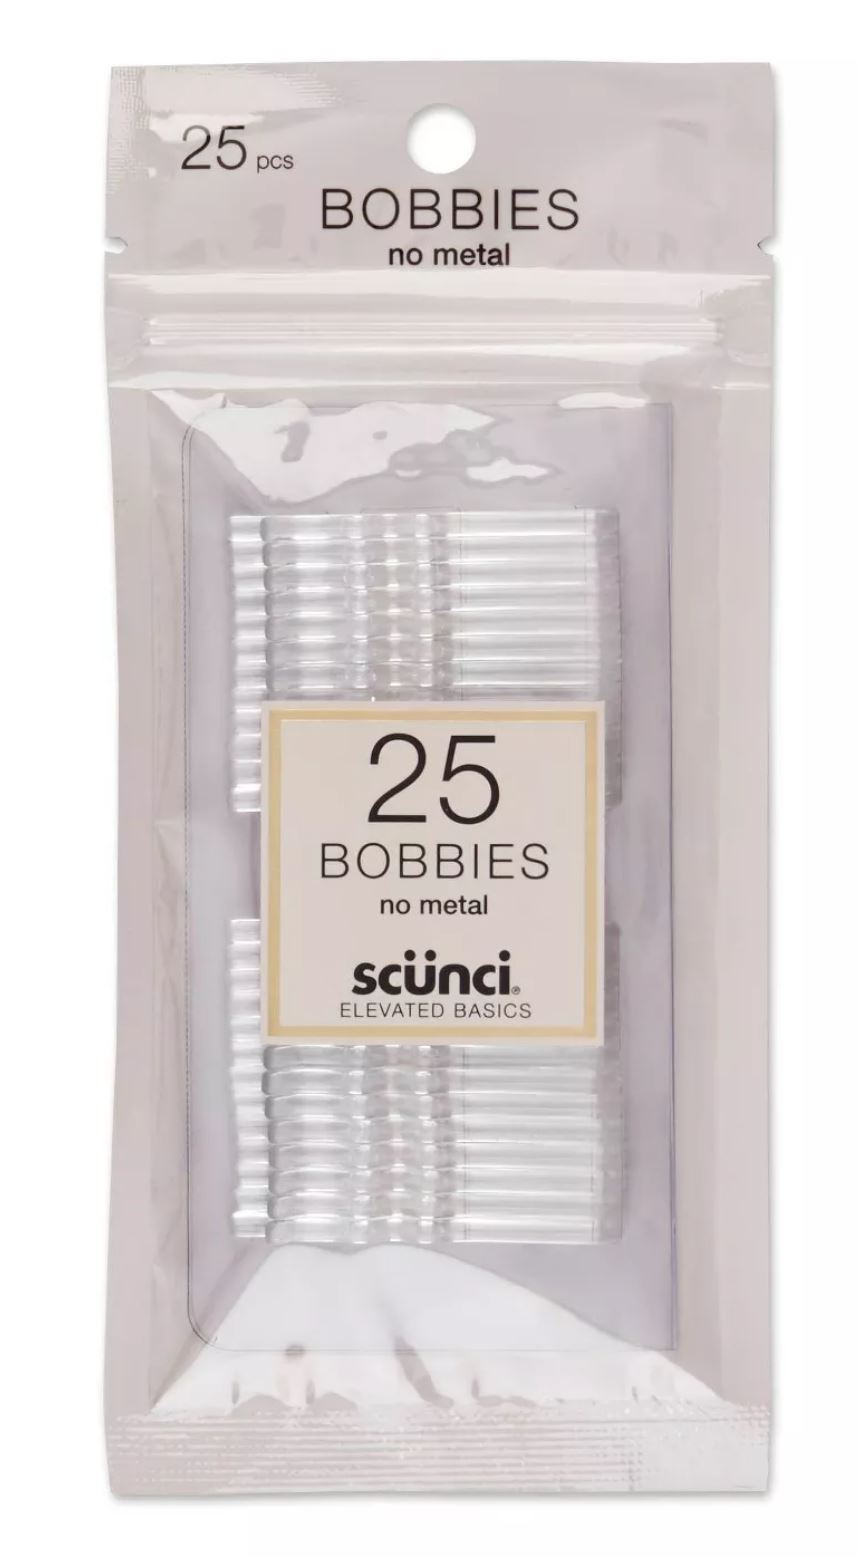 Scunci Clear No Metal Elevated Basics Bobby pins - 25ct : Wholesale fashion  accessories and jewelry, bows - clips - scrunchies - twisters - keychains -  bracelets - necklaces - toe rings - bandanas - brushes and more